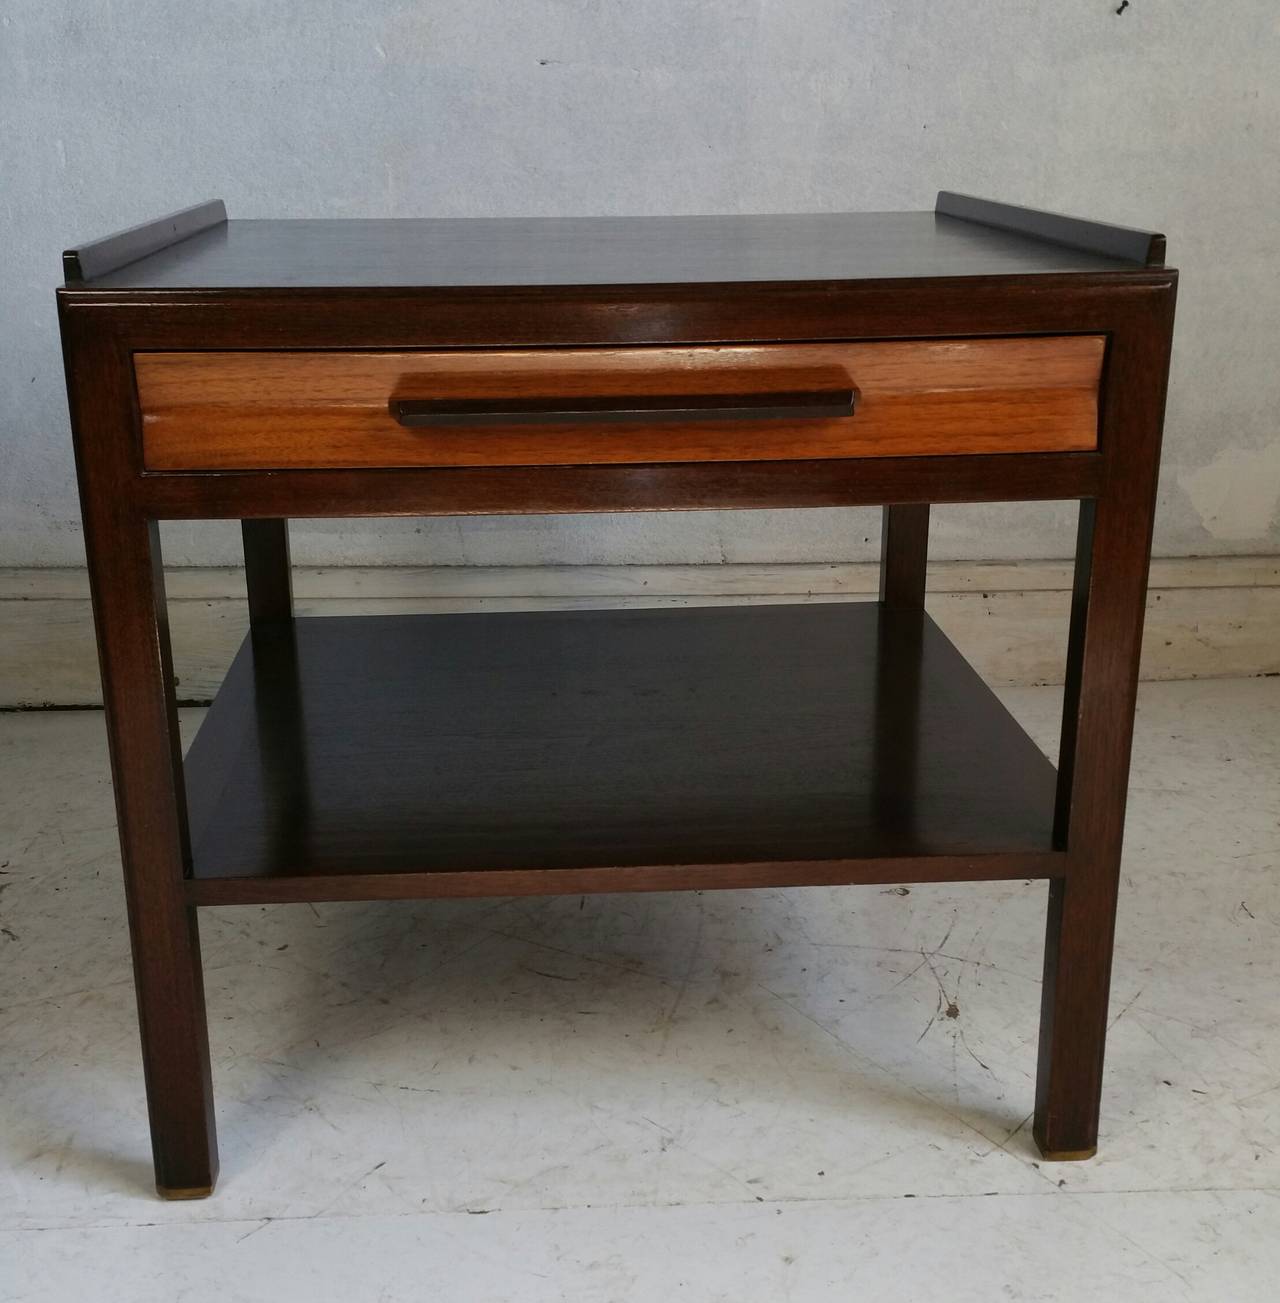 Very unusual lamp or center table designed by Edward Wormley for Dunbar,,Superior quality, Solid mahogany ,, Two-tone finish...,bevel drawer and hand pull.Elegant brass trim to bottom legs. Simple .sleek architectural design,,